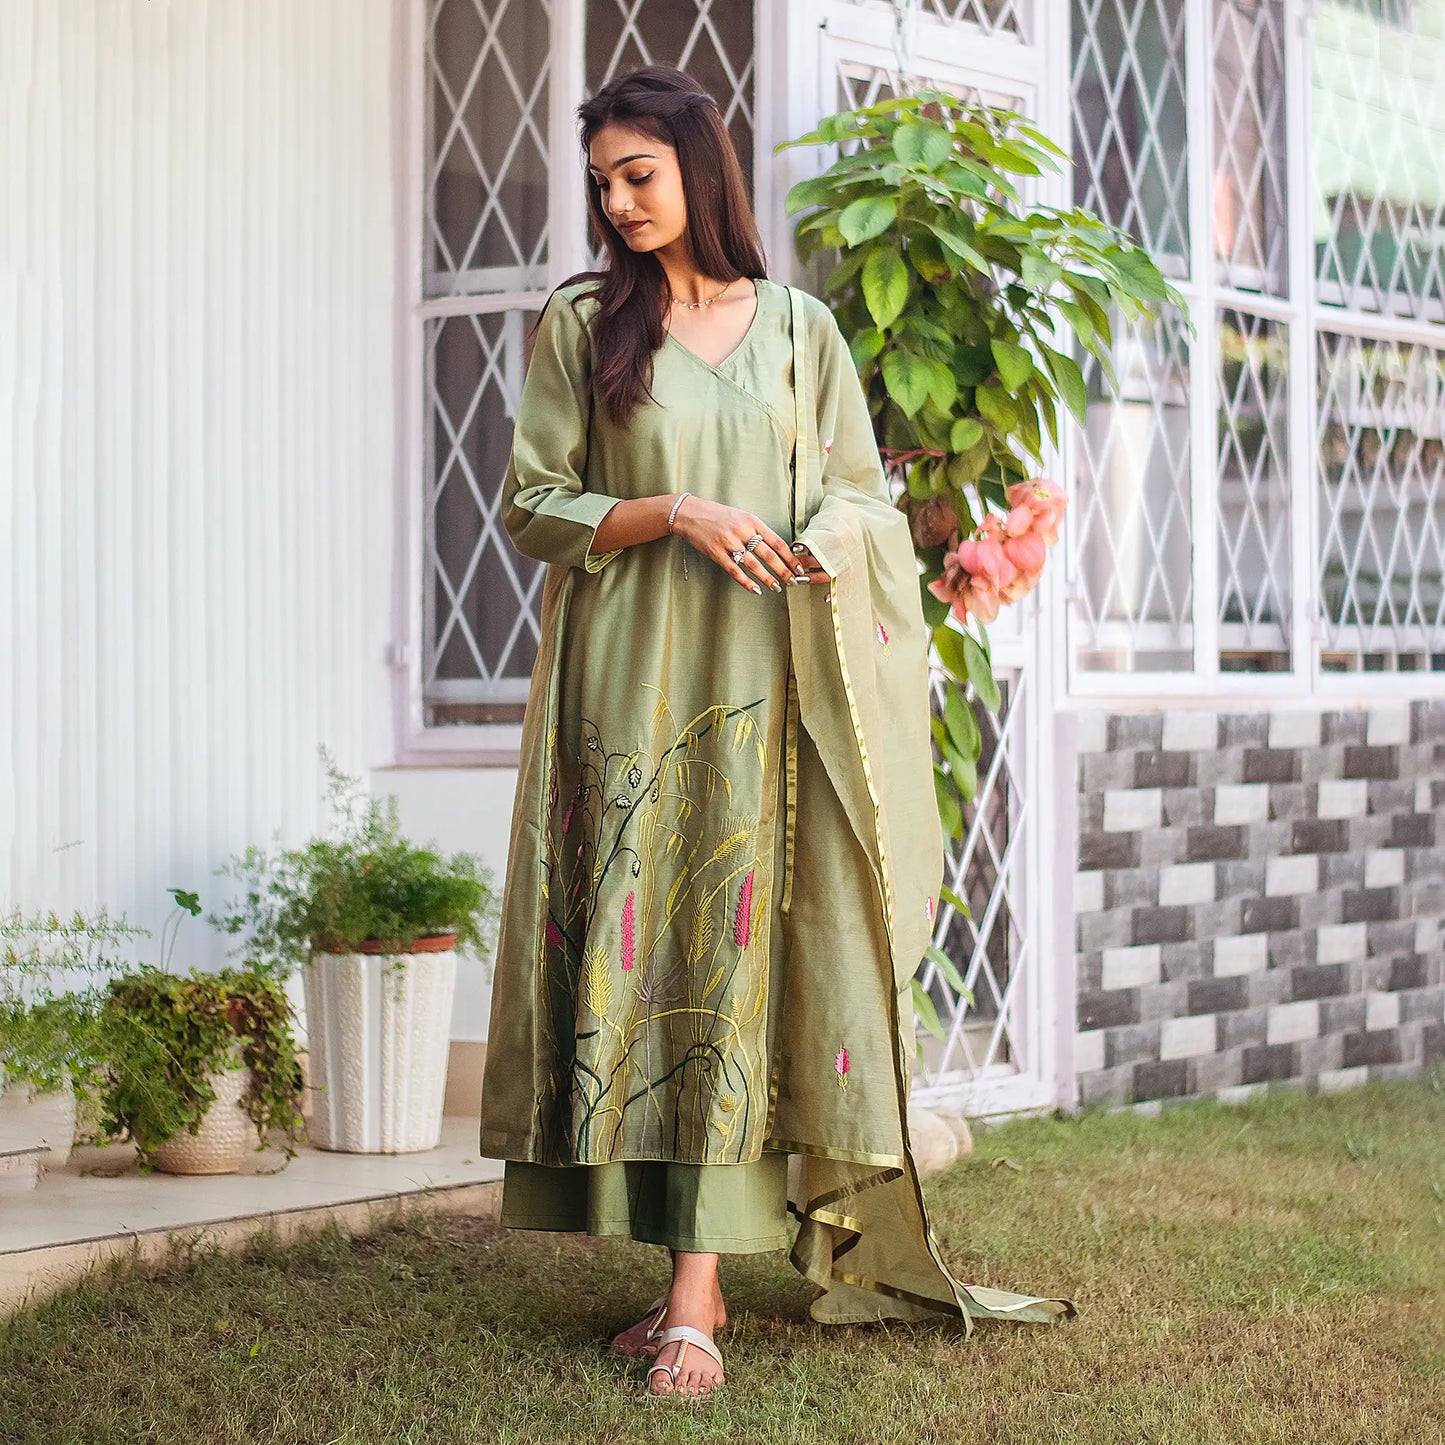 Model wearing the green kurta set in an elegant another pose, showcasing the ensemble's style